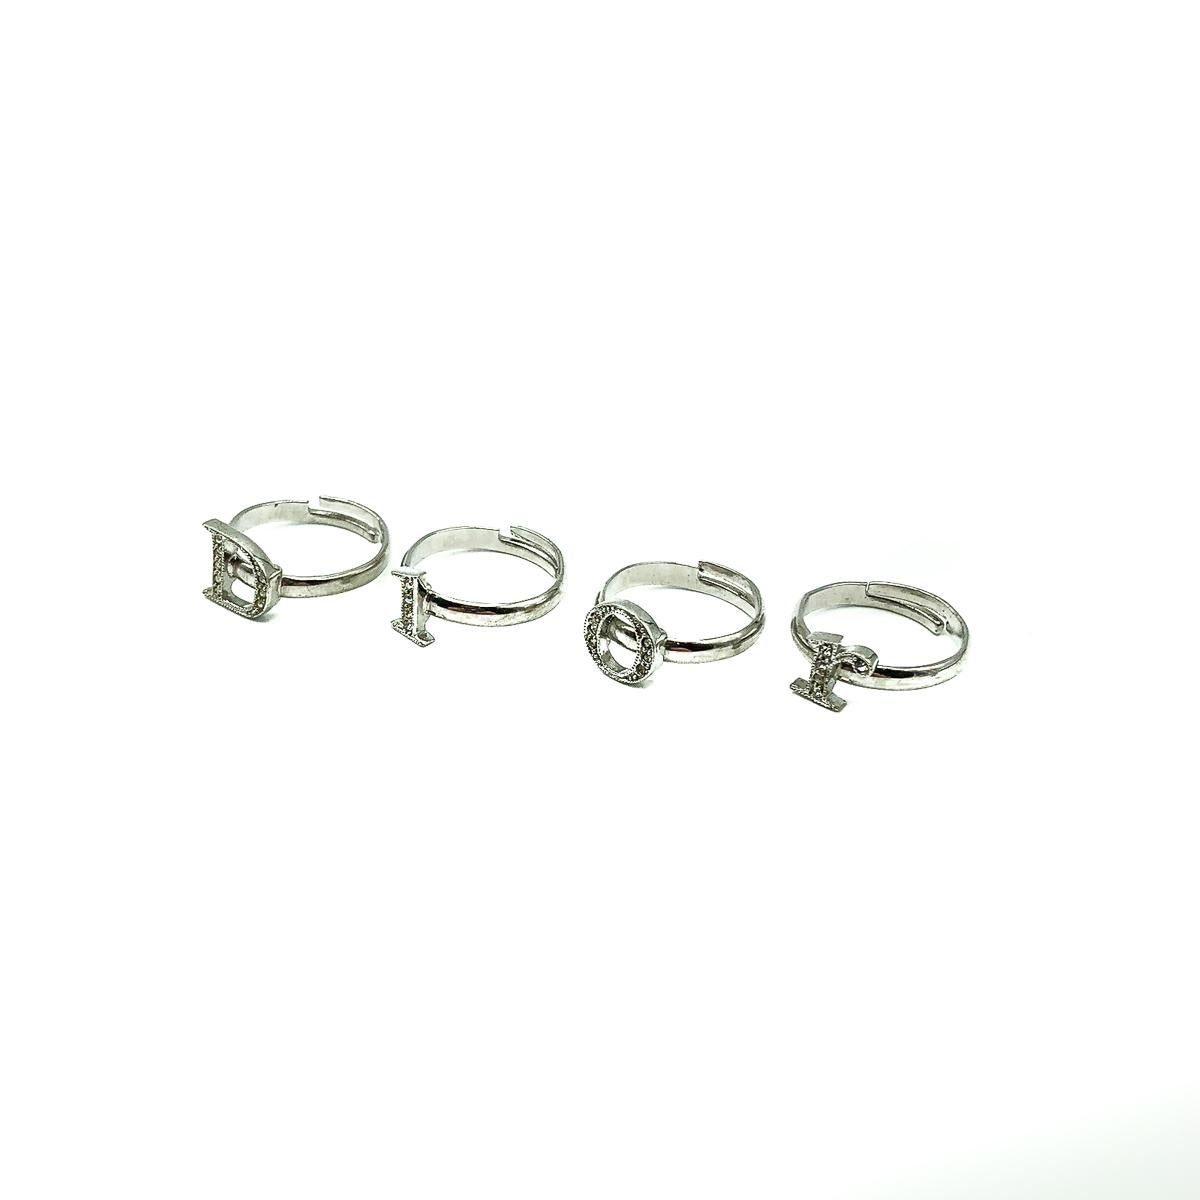 A divine set of Vintage Dior Stacking Rings. Crafted in rhodium plated metal and crystals. Four rings each depicting a letter spelling out the iconic House. These are an original design and not converted from necklace charms. In very good vintage